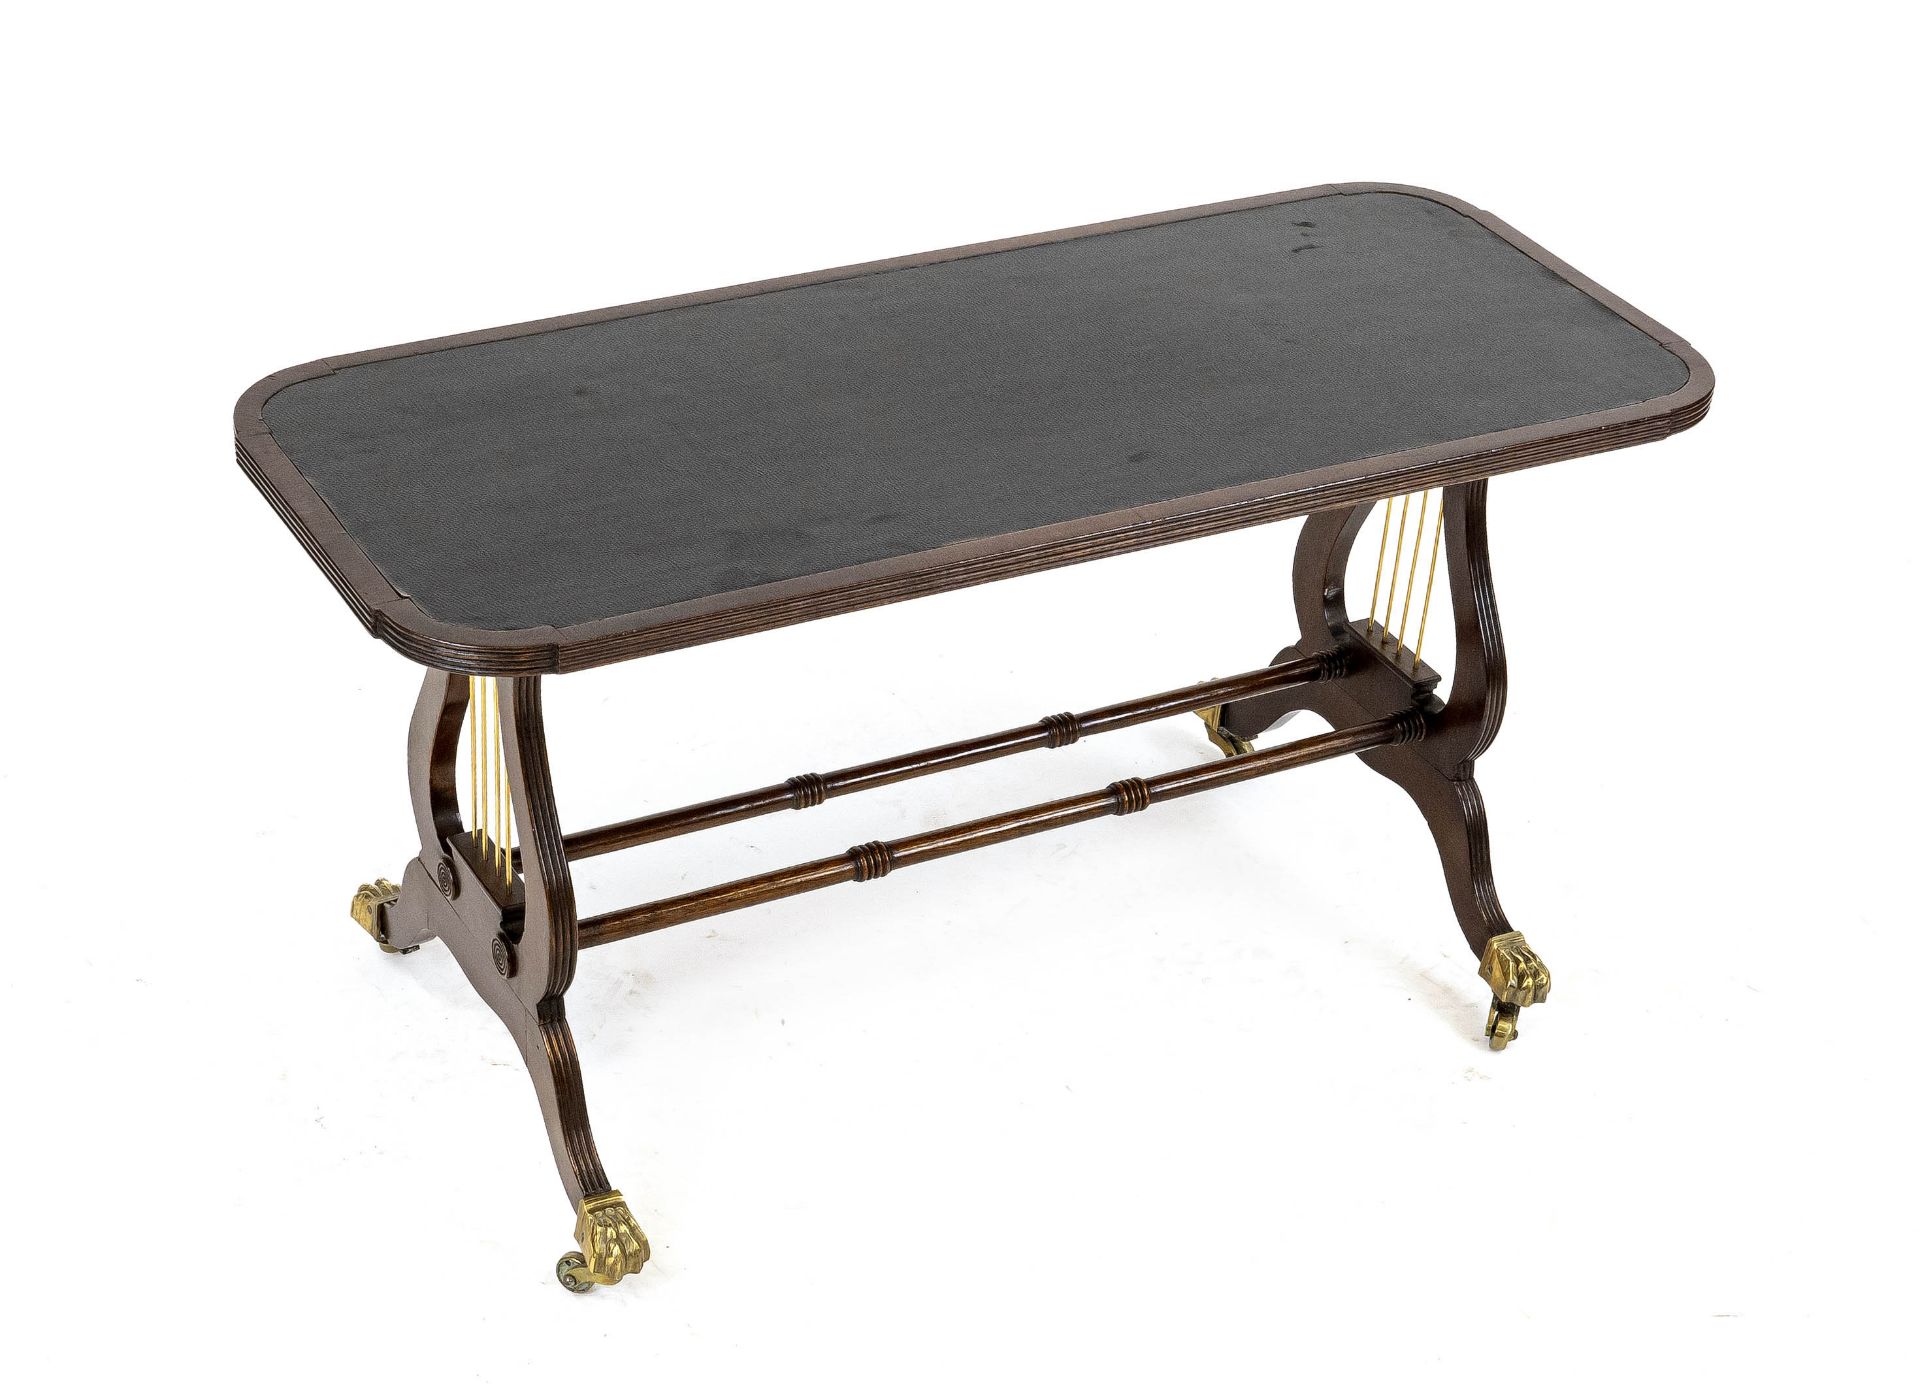 Side table in Biedermeier style, 20th century, mahogany, frame on brass paw feet with castors, 47